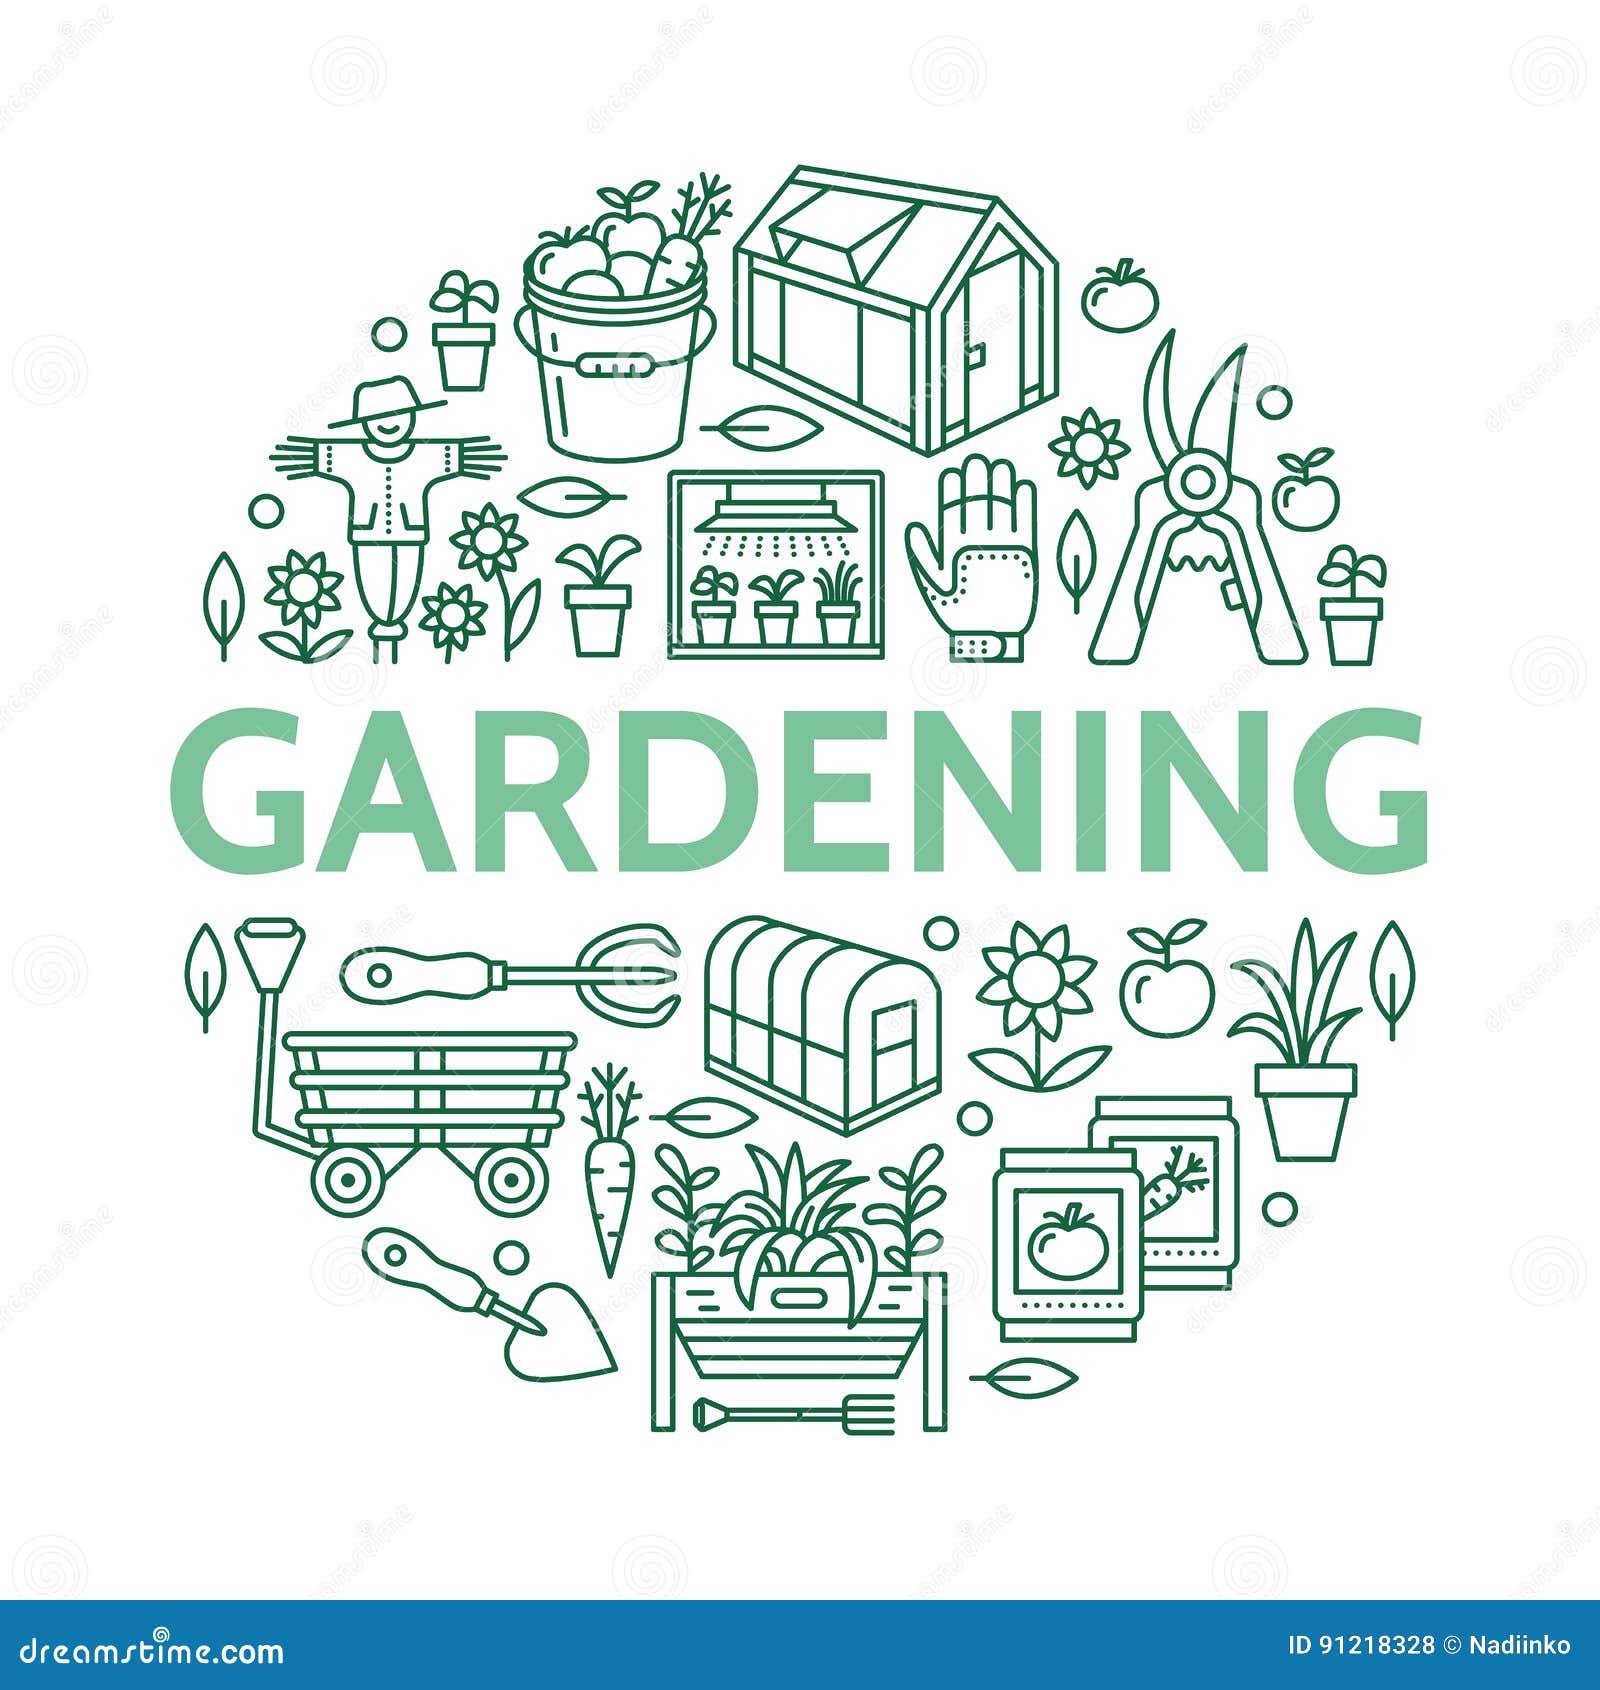 gardening, planting horticulture banner with  line icon. garden equipment, organic seeds, green house, pruners